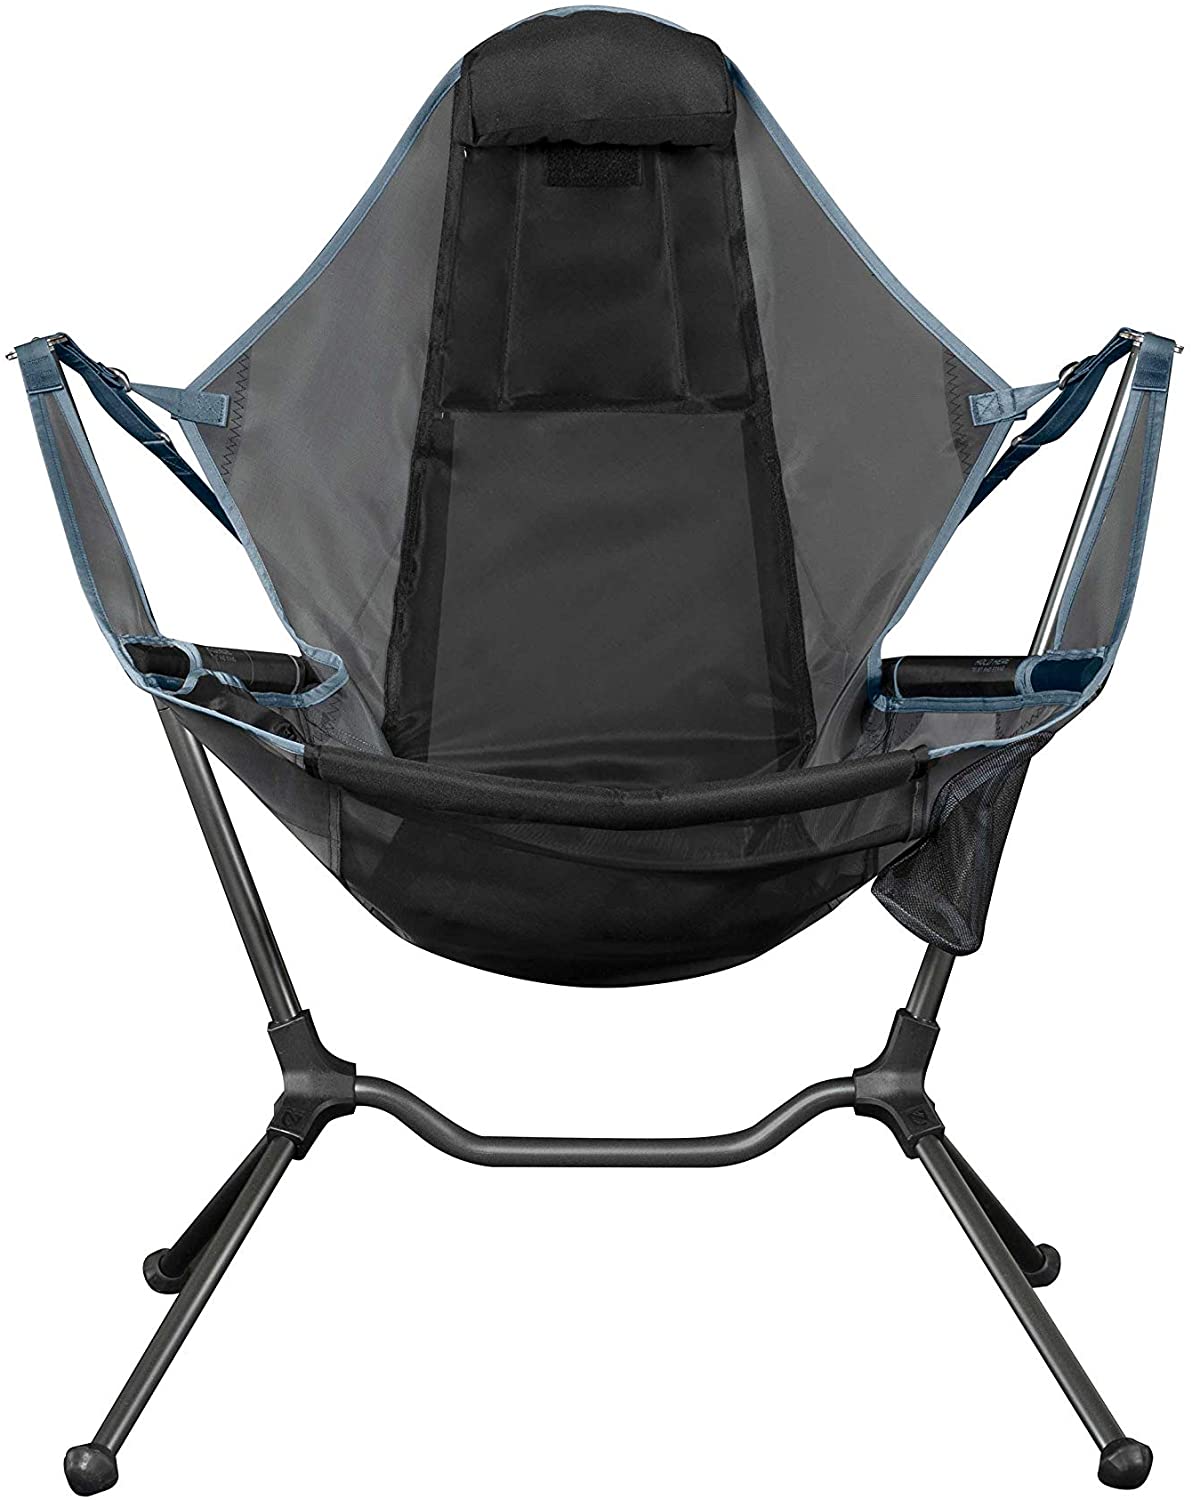 5 Best Camping Chairs for 2020: Comfort in the Outdoors